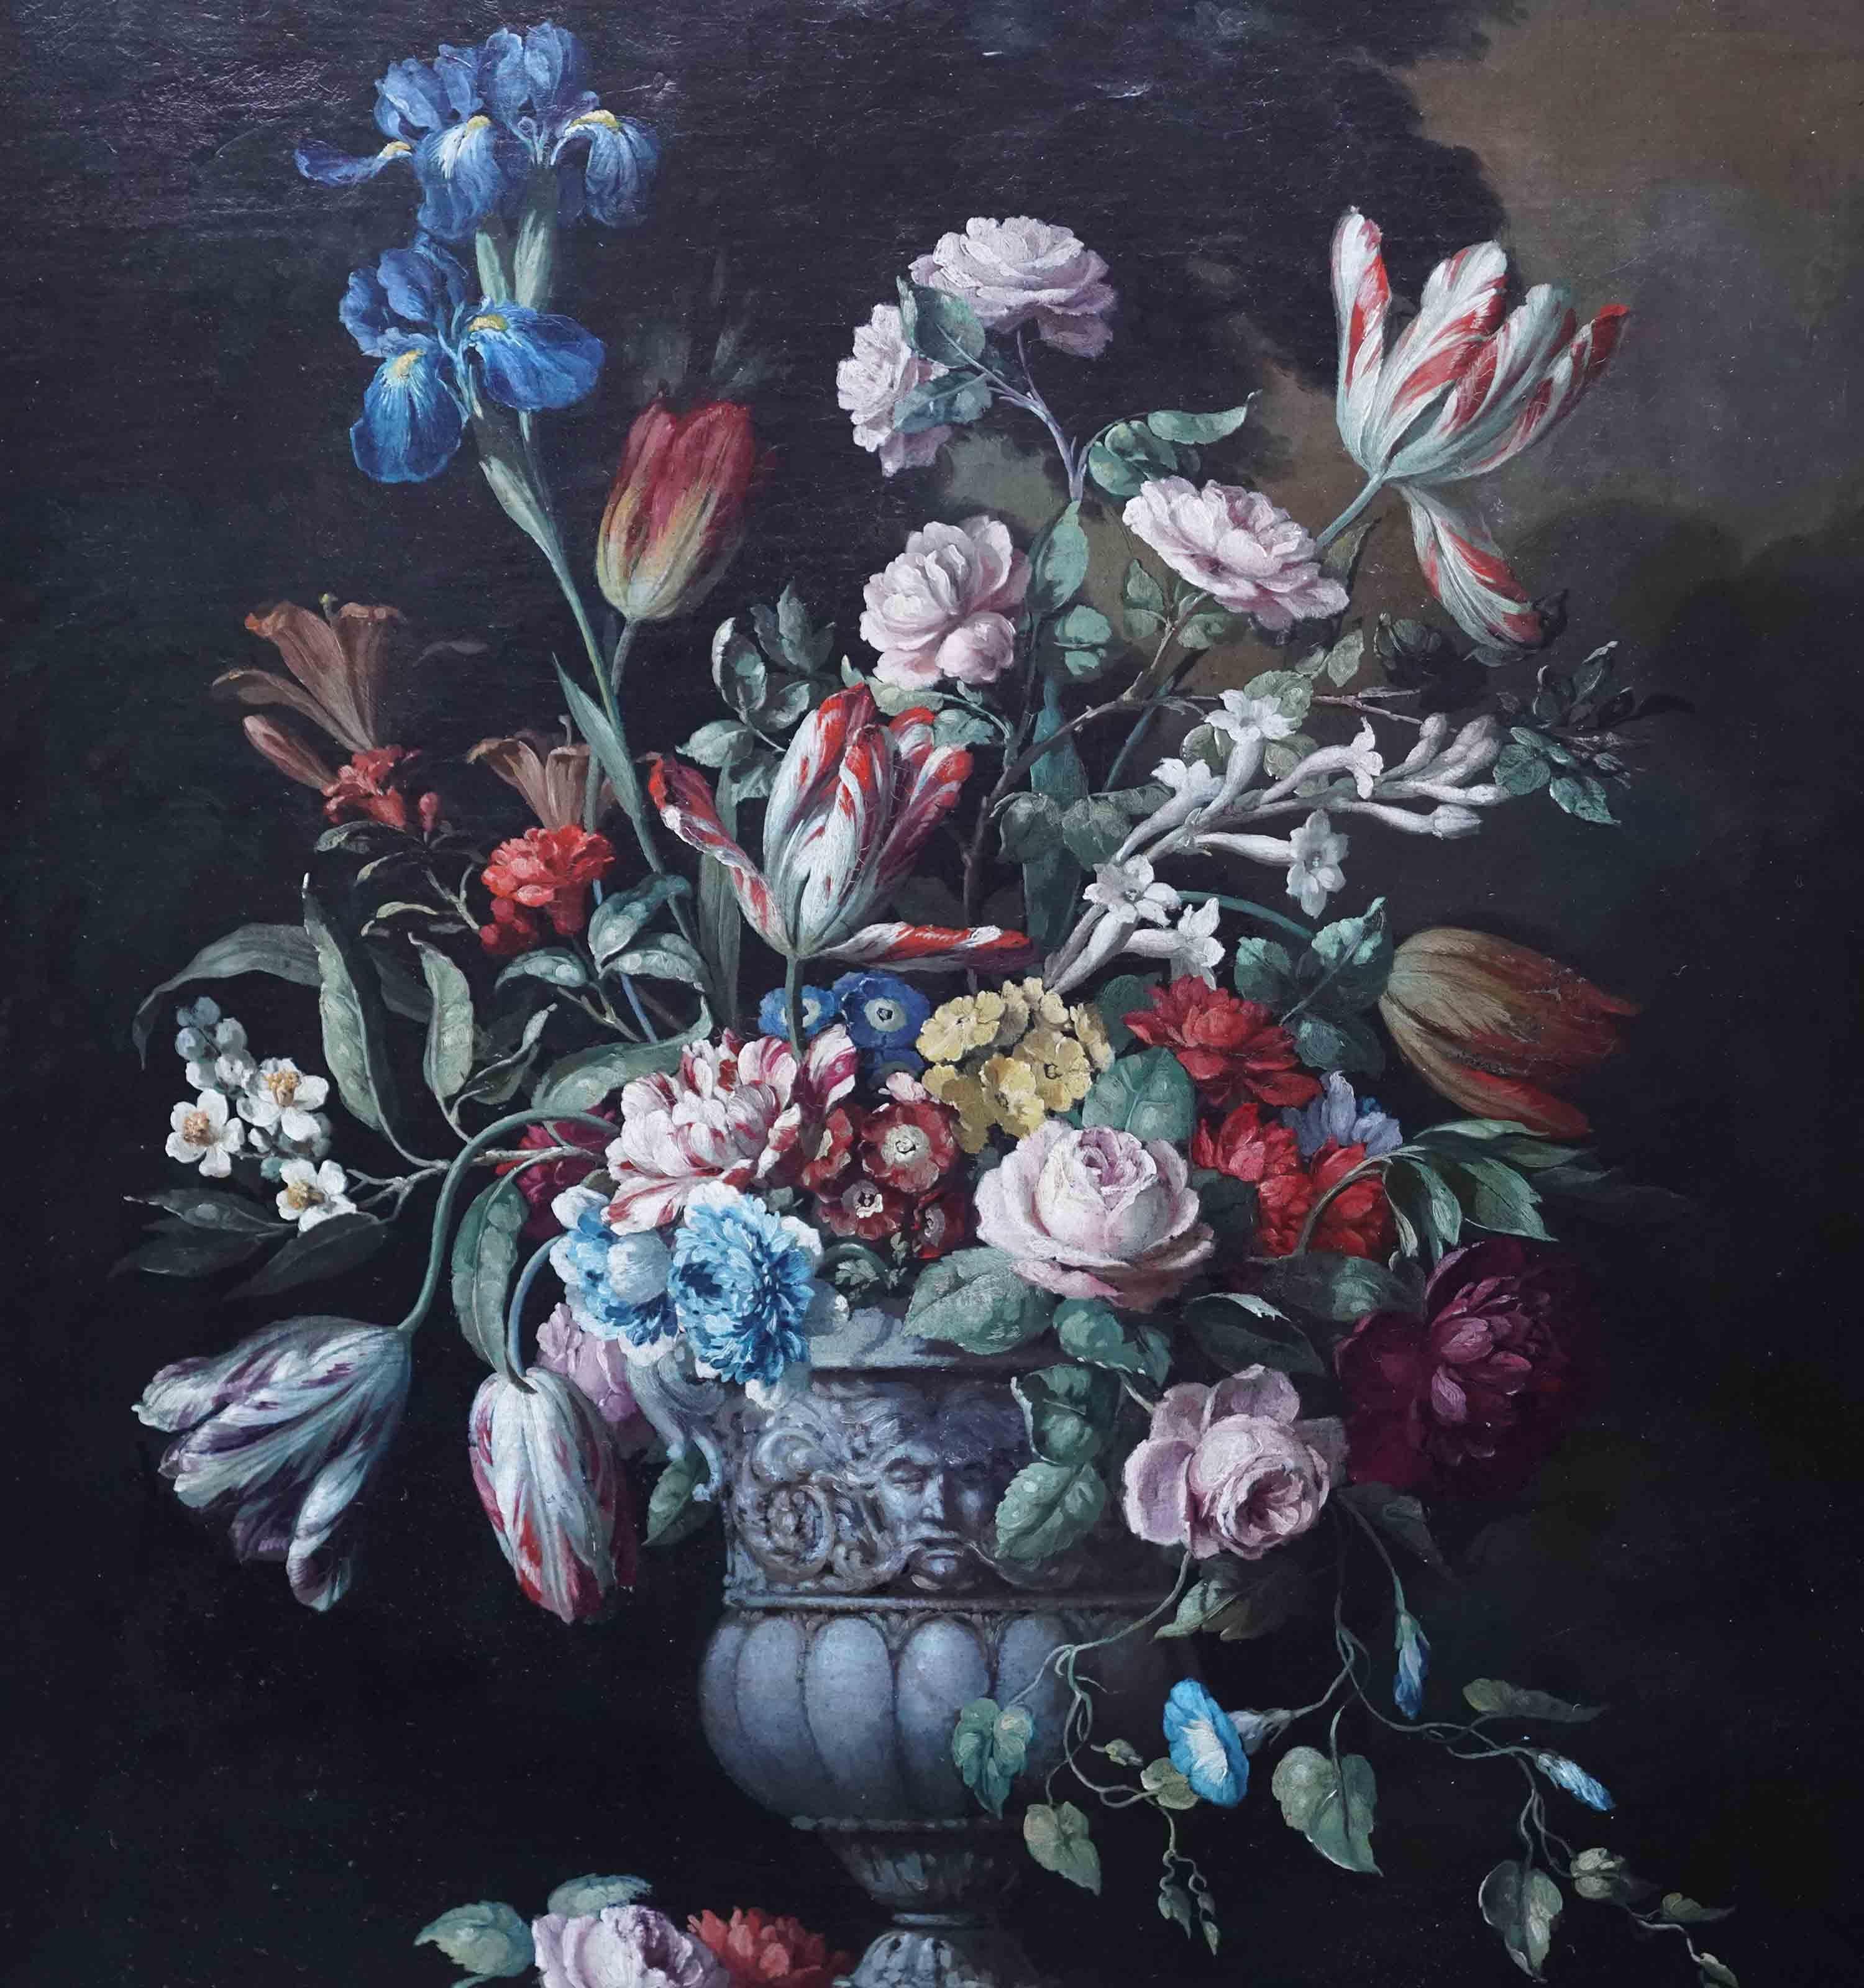 Still Life of Flowers in Ornamental Urn on Ledge - Dutch Old Master oil painting - Old Masters Painting by Gerard van Spaendonck